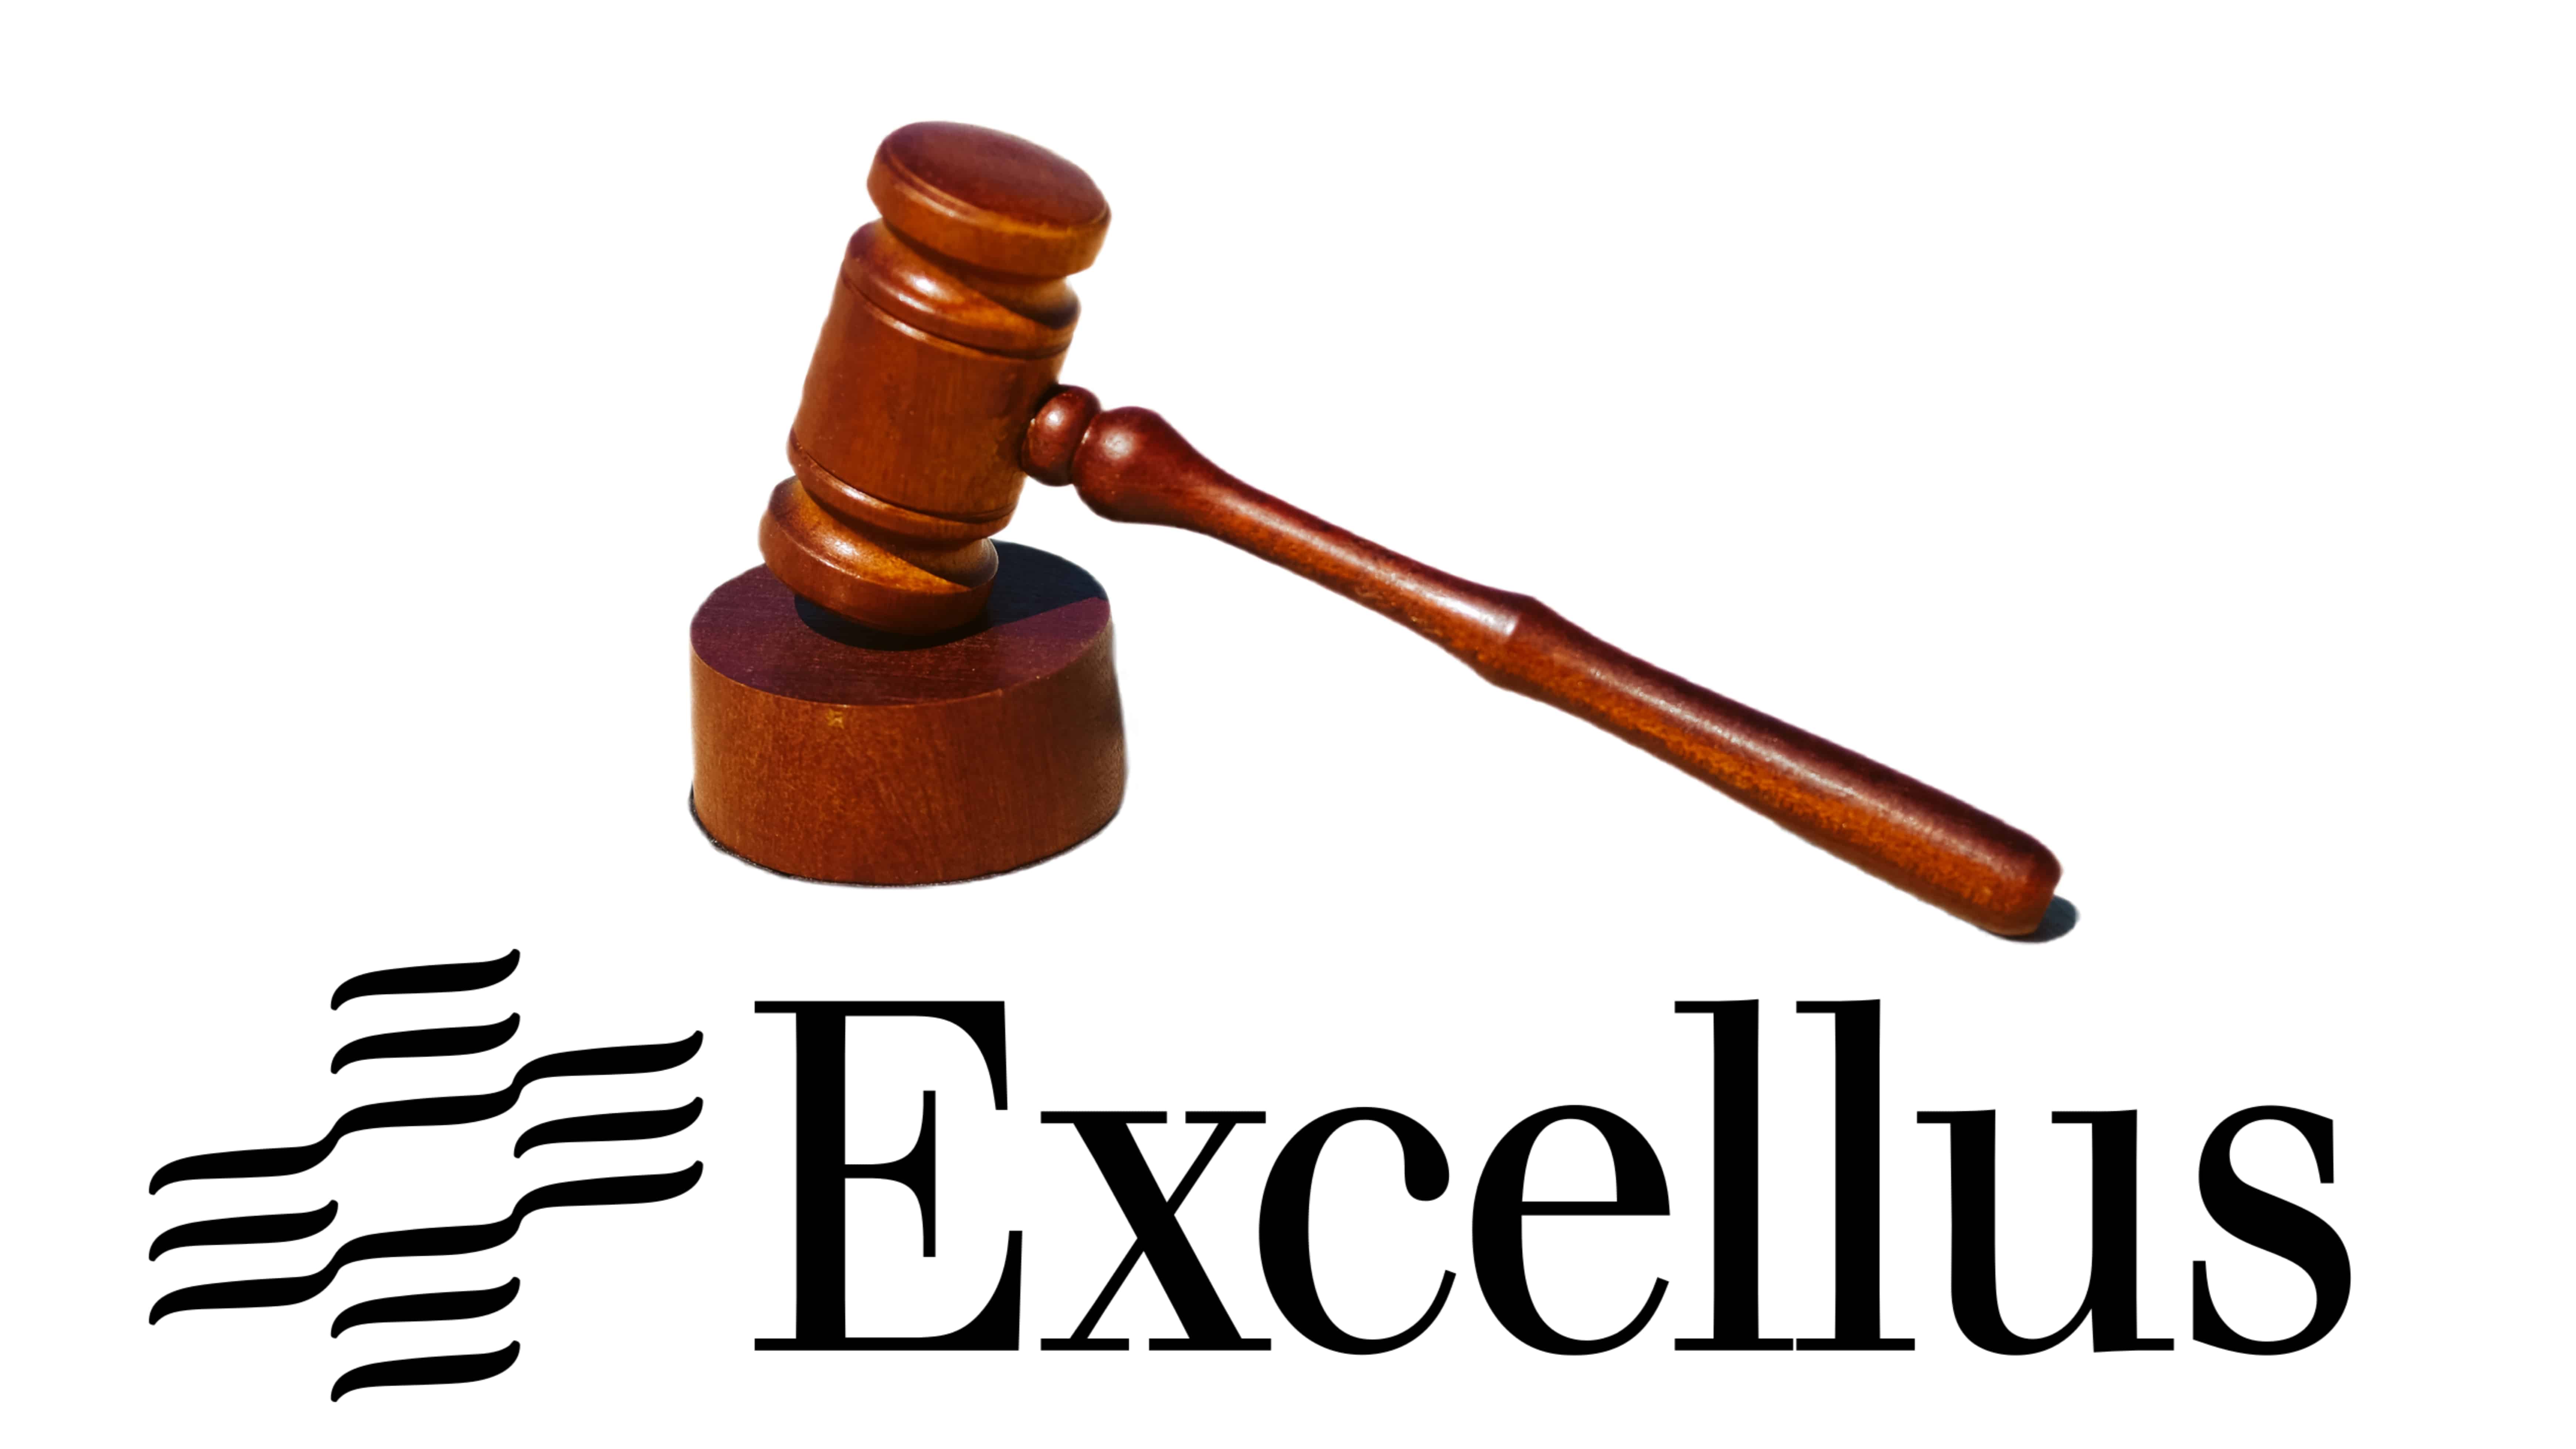 Excellus HIPAA Class Action Lawsuit